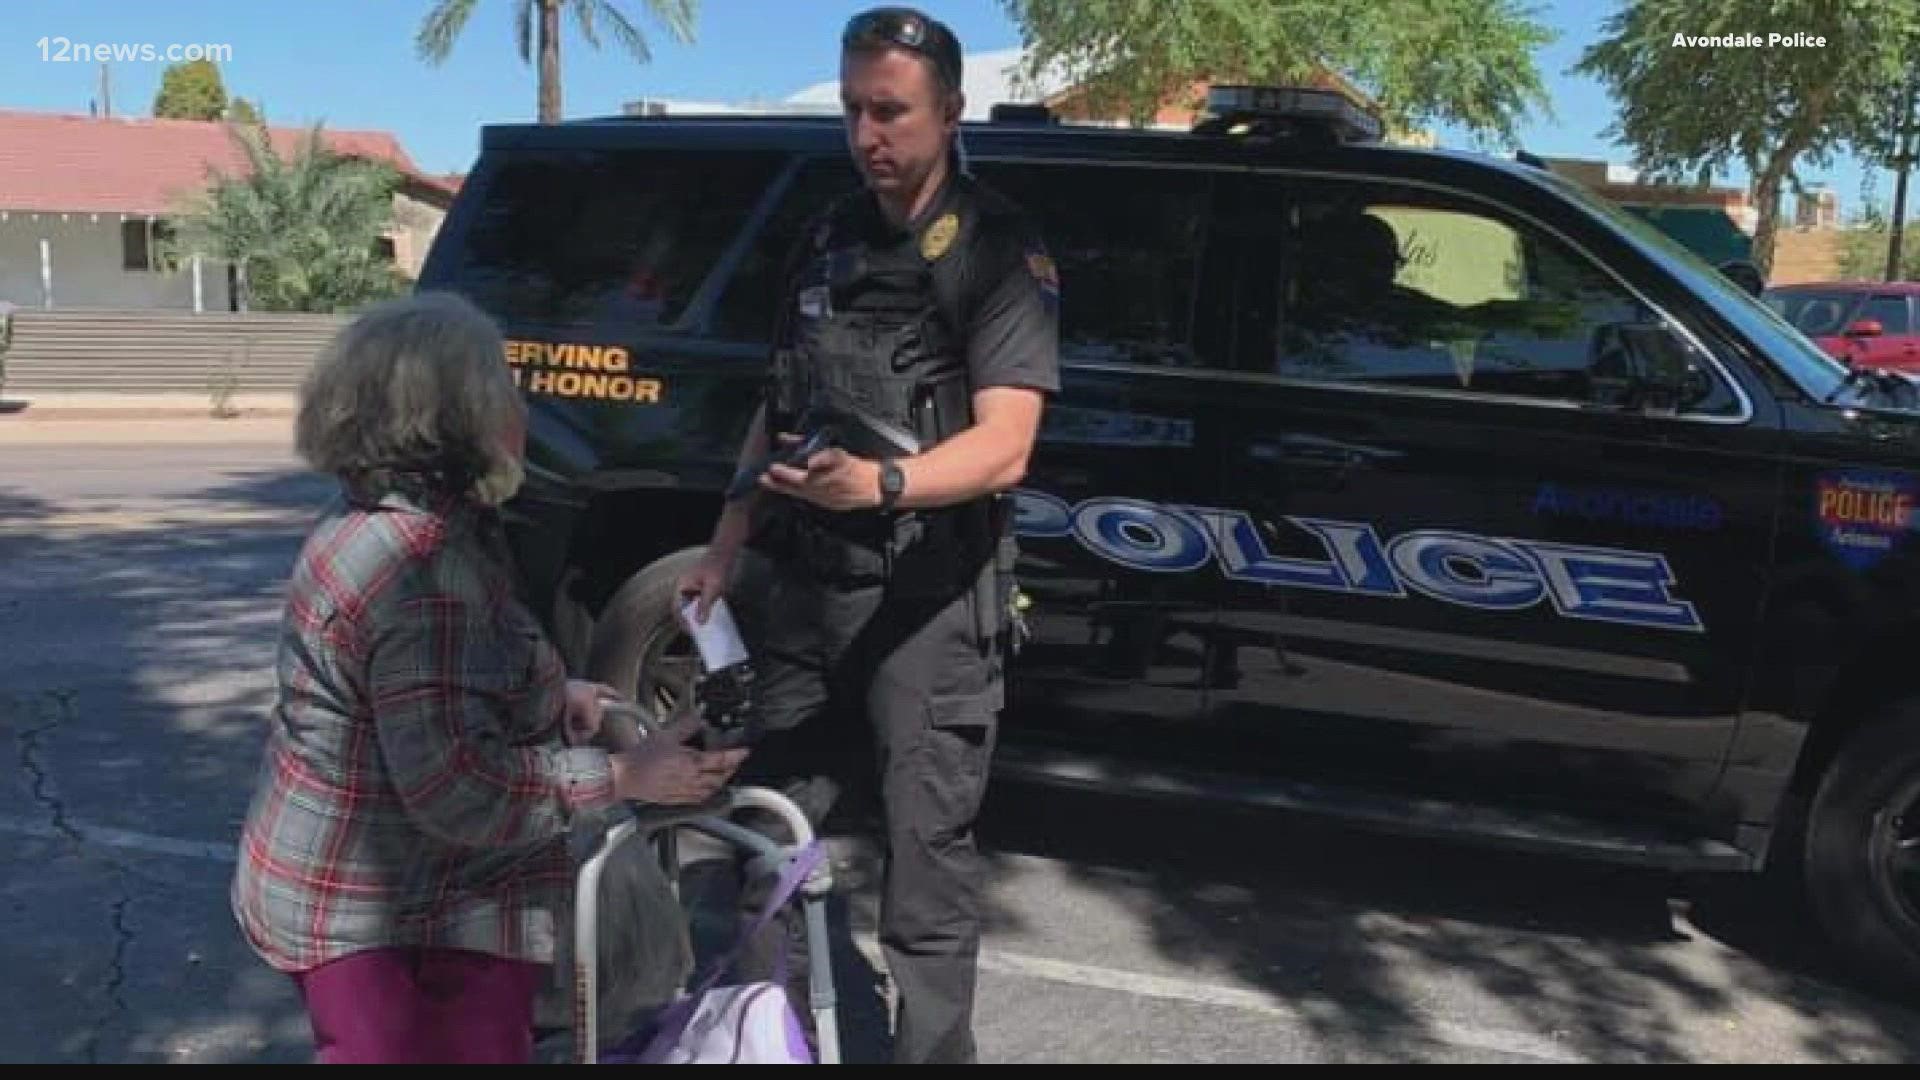 Avondale PD said a caregiver for an elderly woman dropped her off at a police station; no longer able to care for her. Resources are available to help caregivers.